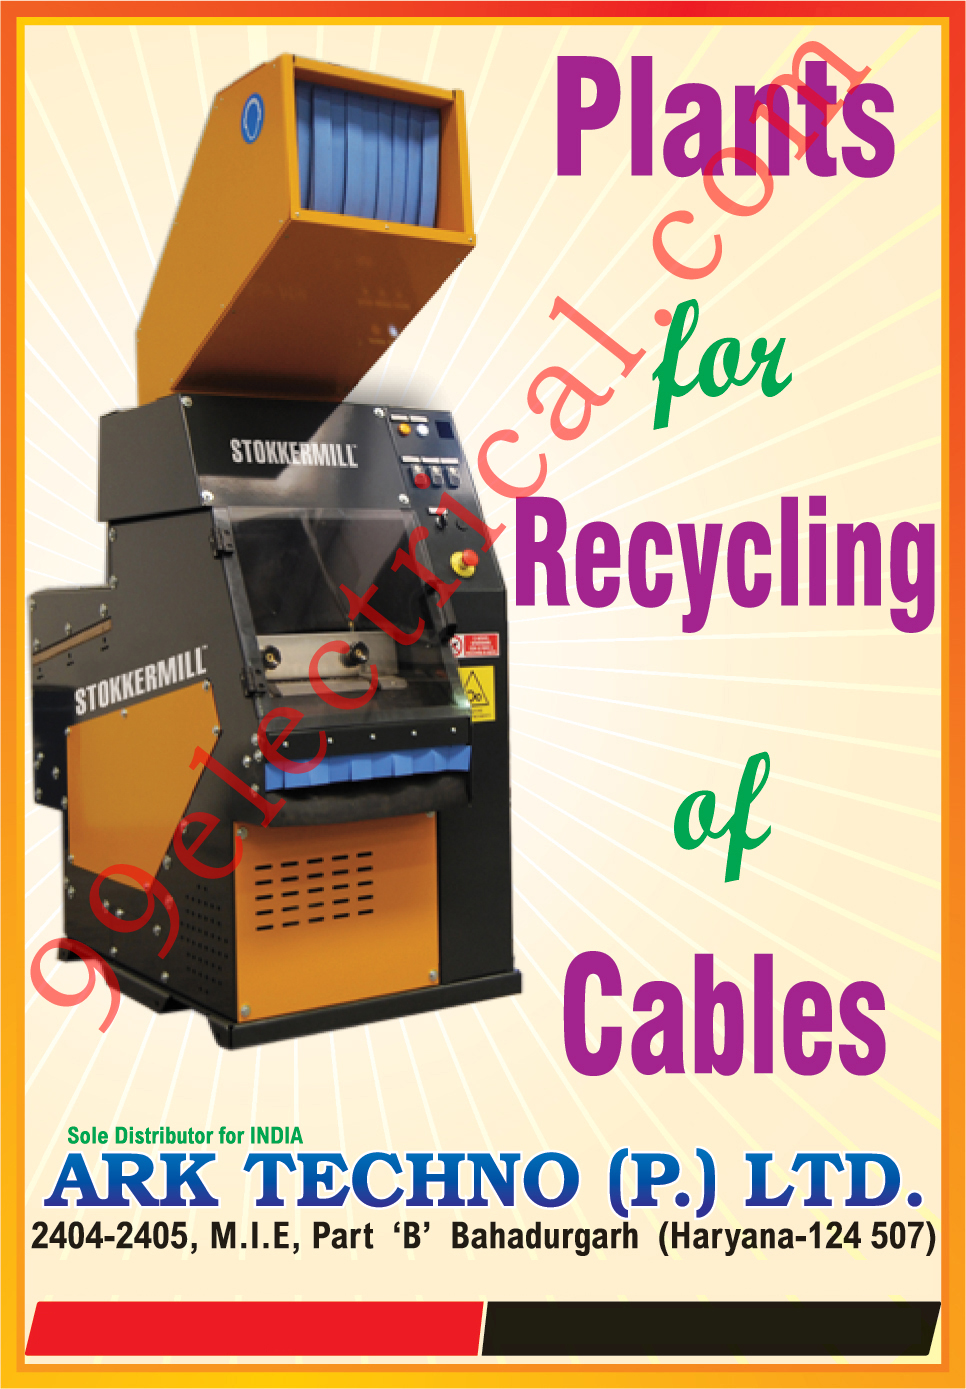 Cable Recycling Plants, Warning Triangles, Reflex Reflectors, Plastic Moulded Parts,Cables Recycling